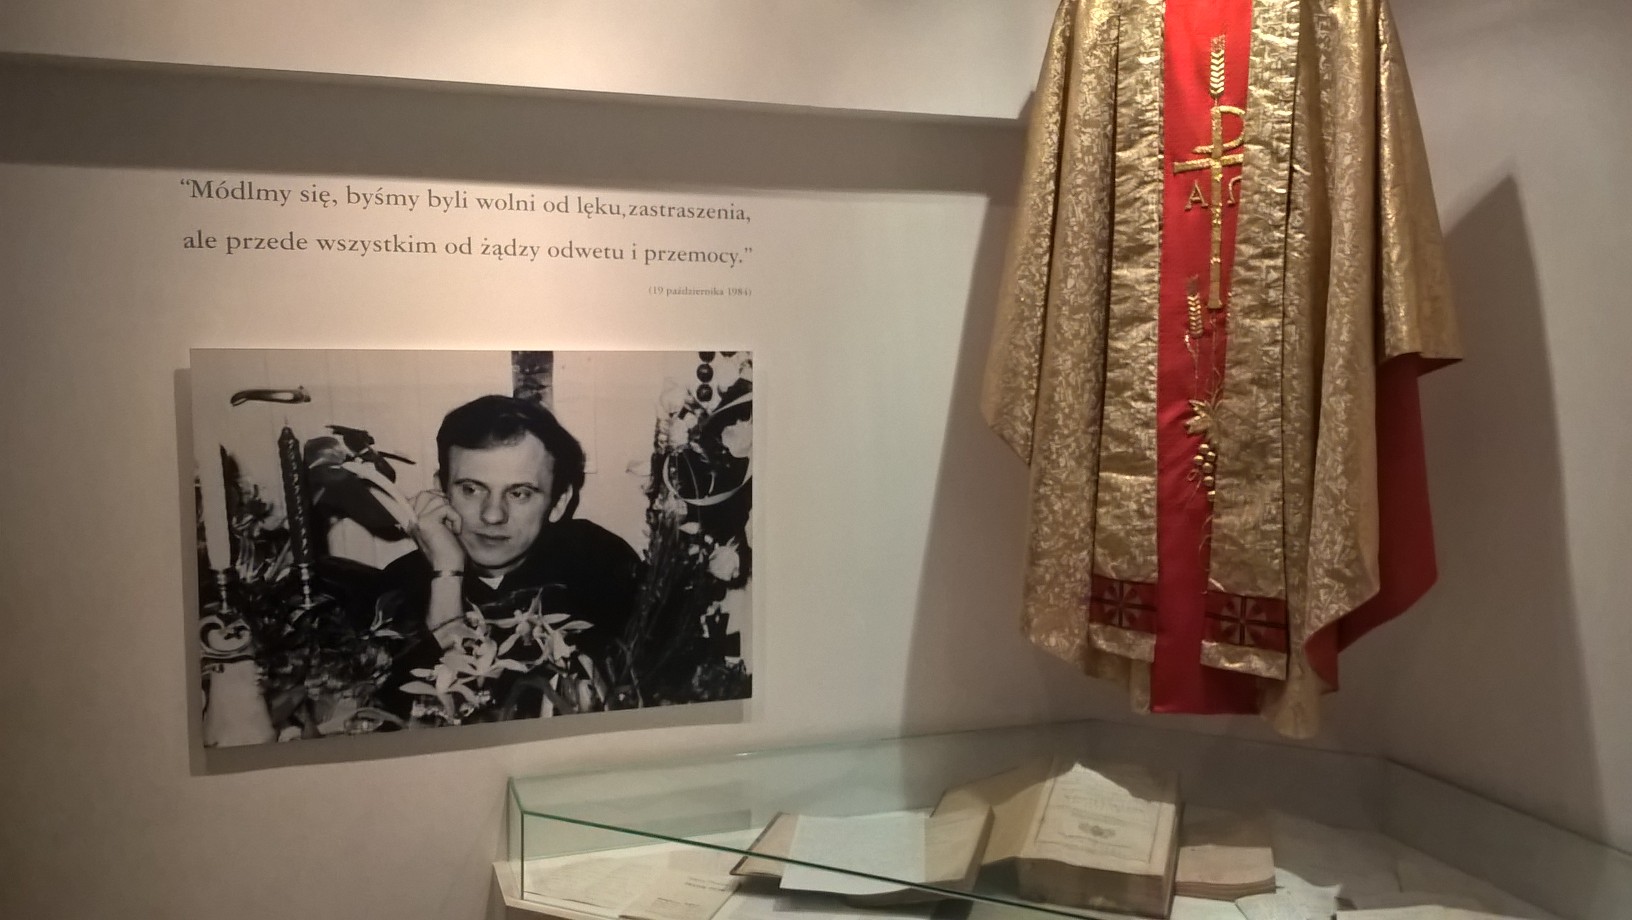 2016-visit-to-warsaw-and-to-the-museum-of-blessed-father-jerzy-popieluszko-21